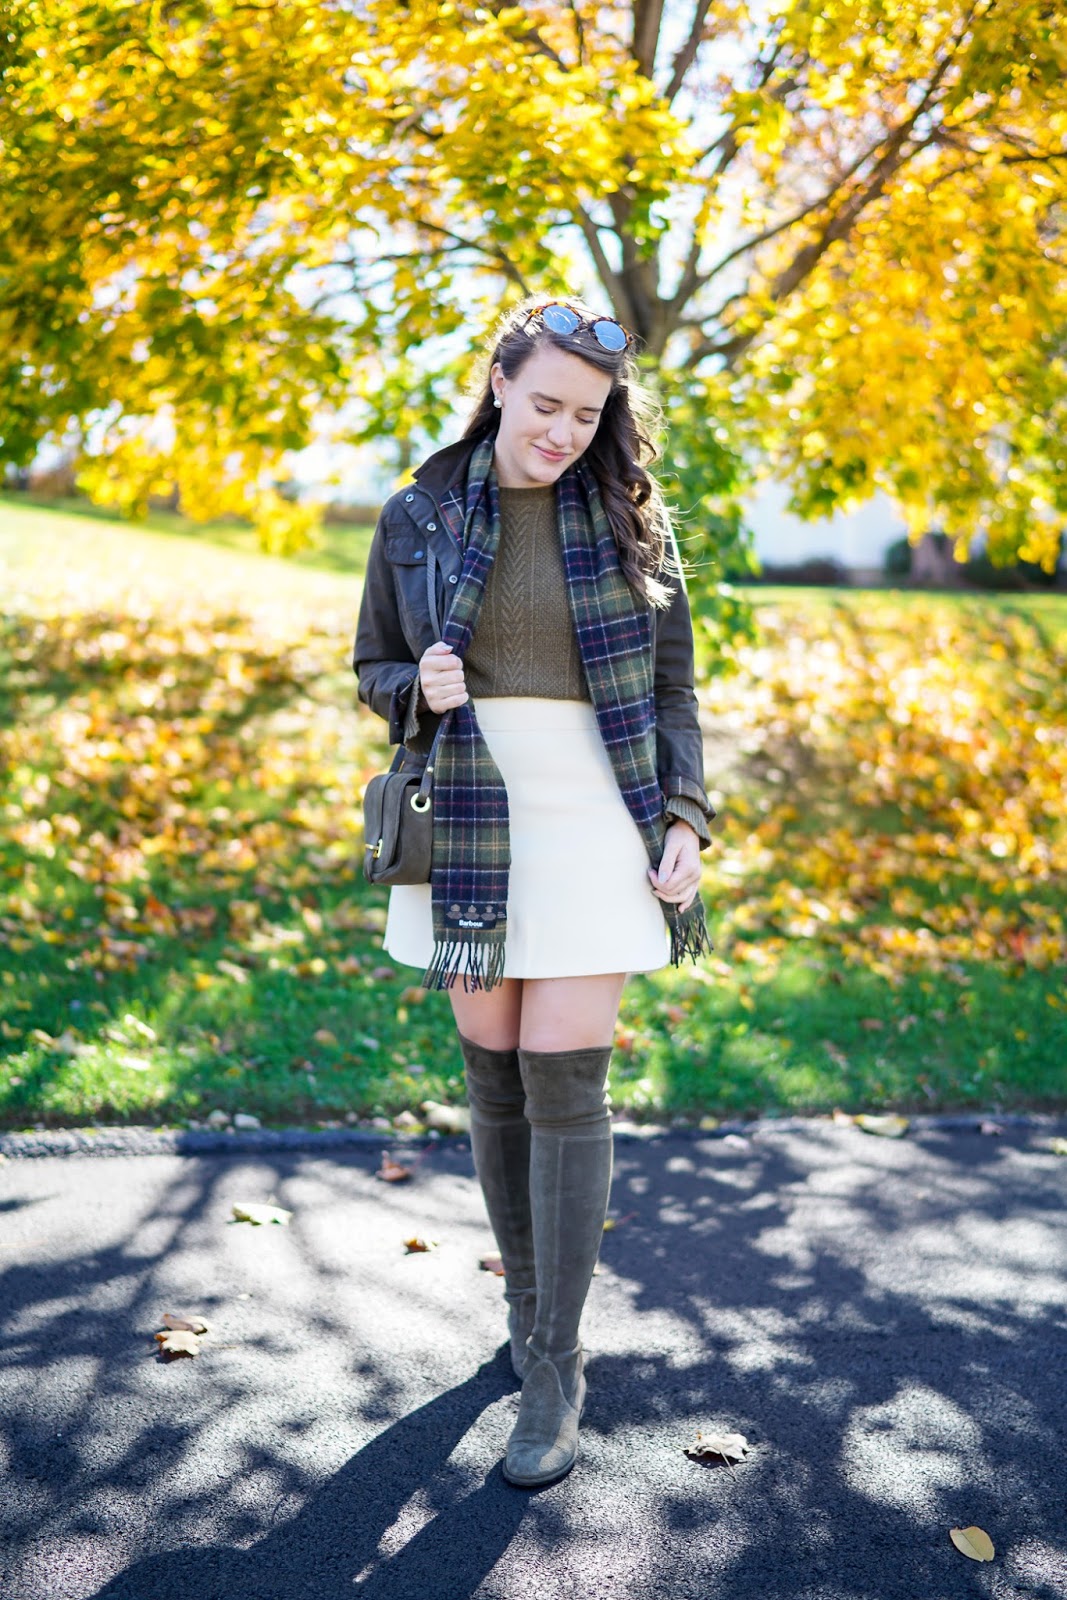 Olive Fall | Connecticut Fashion and Lifestyle Blog | Covering the Bases